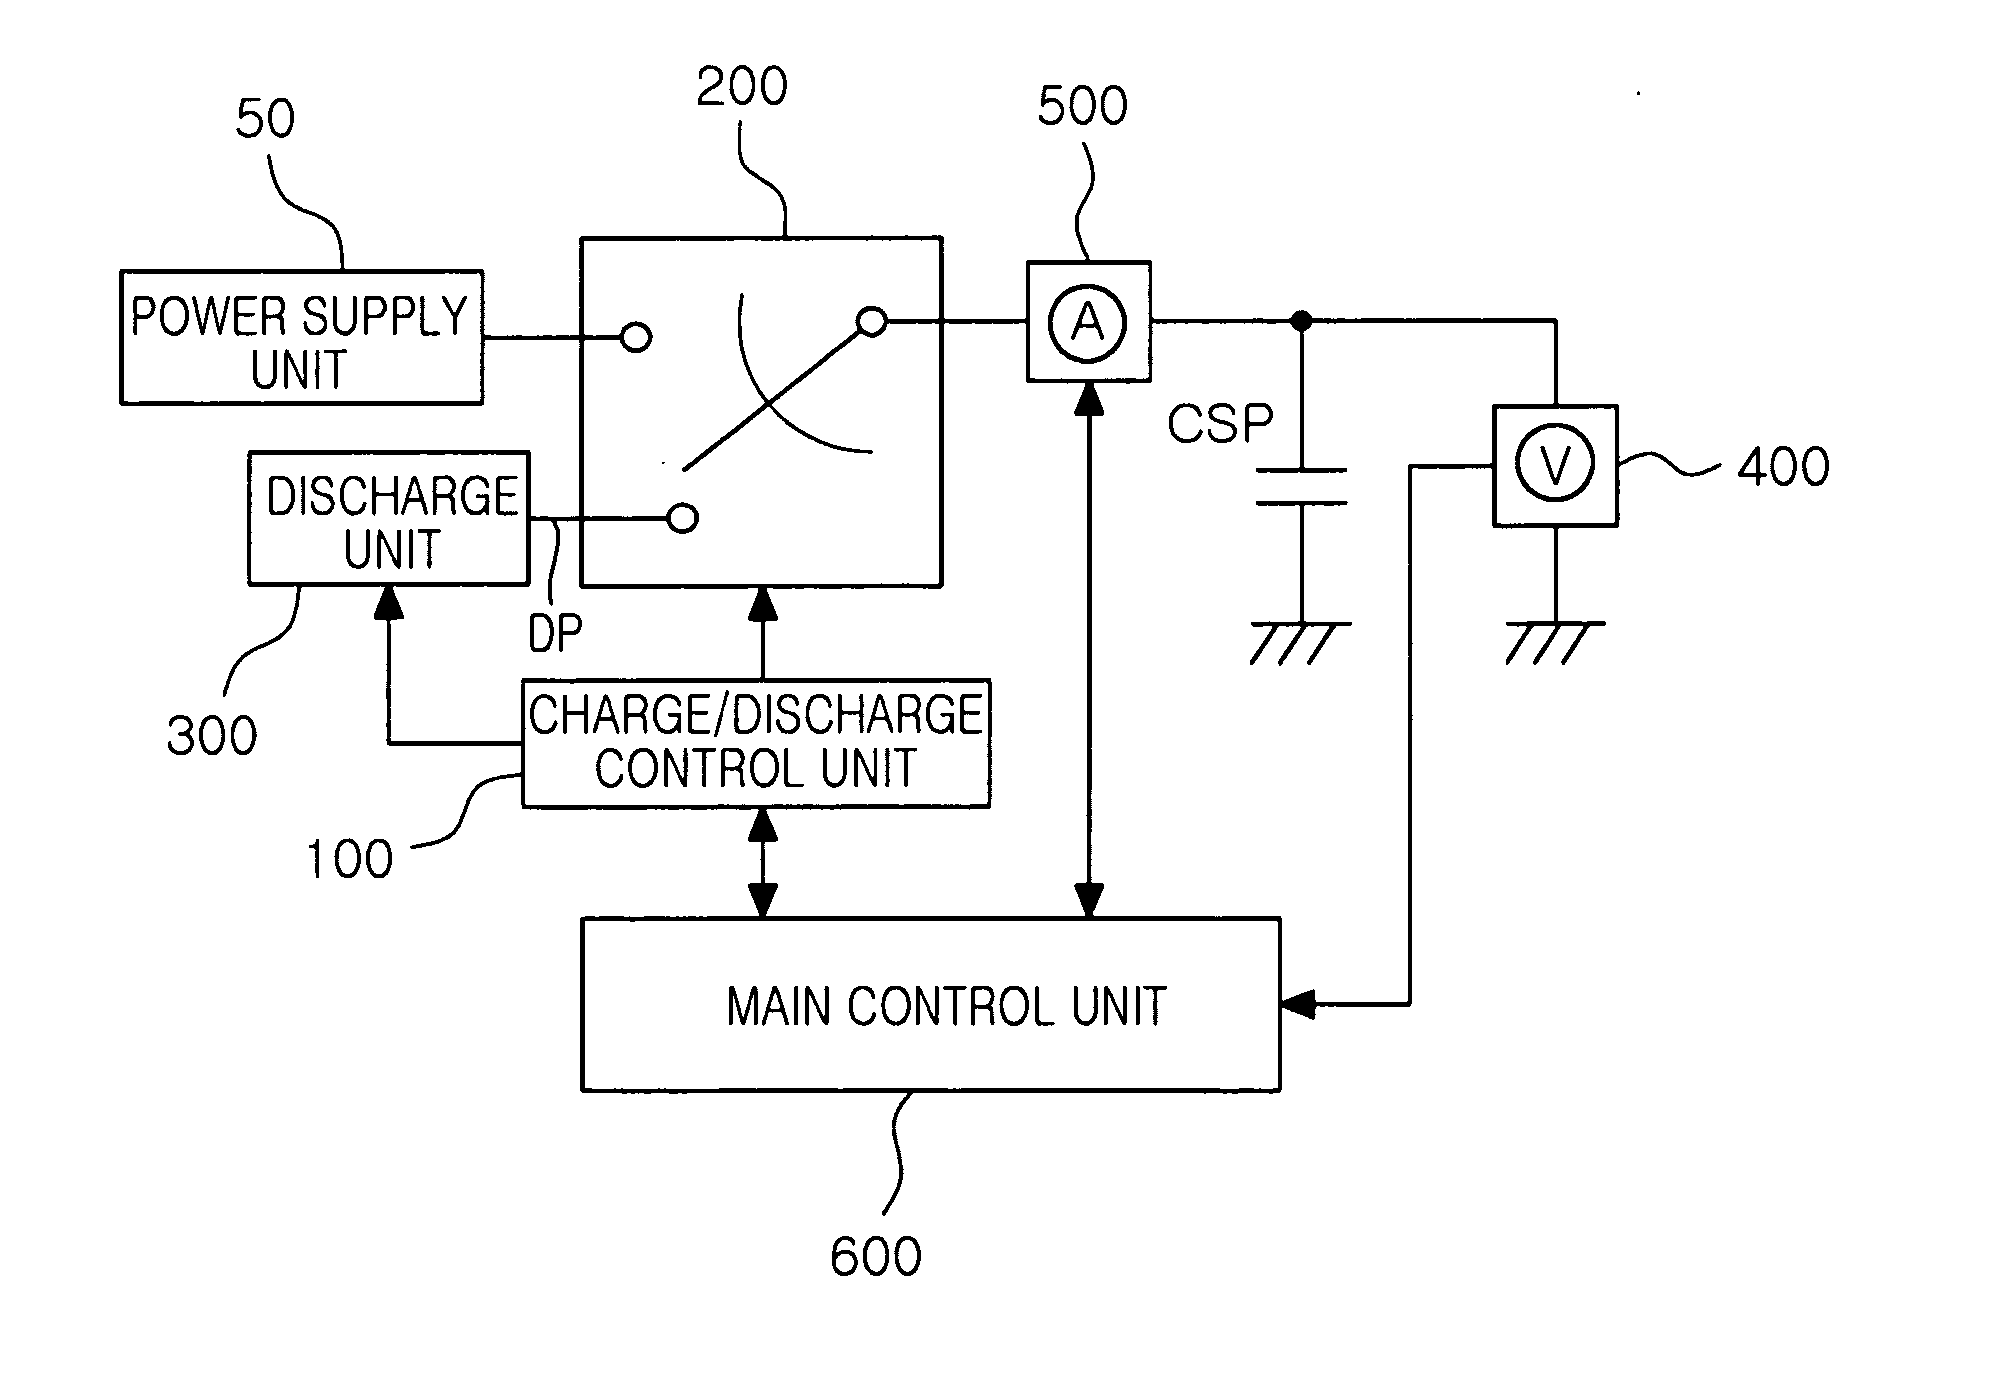 Apparatus and method for evaluating capacitor